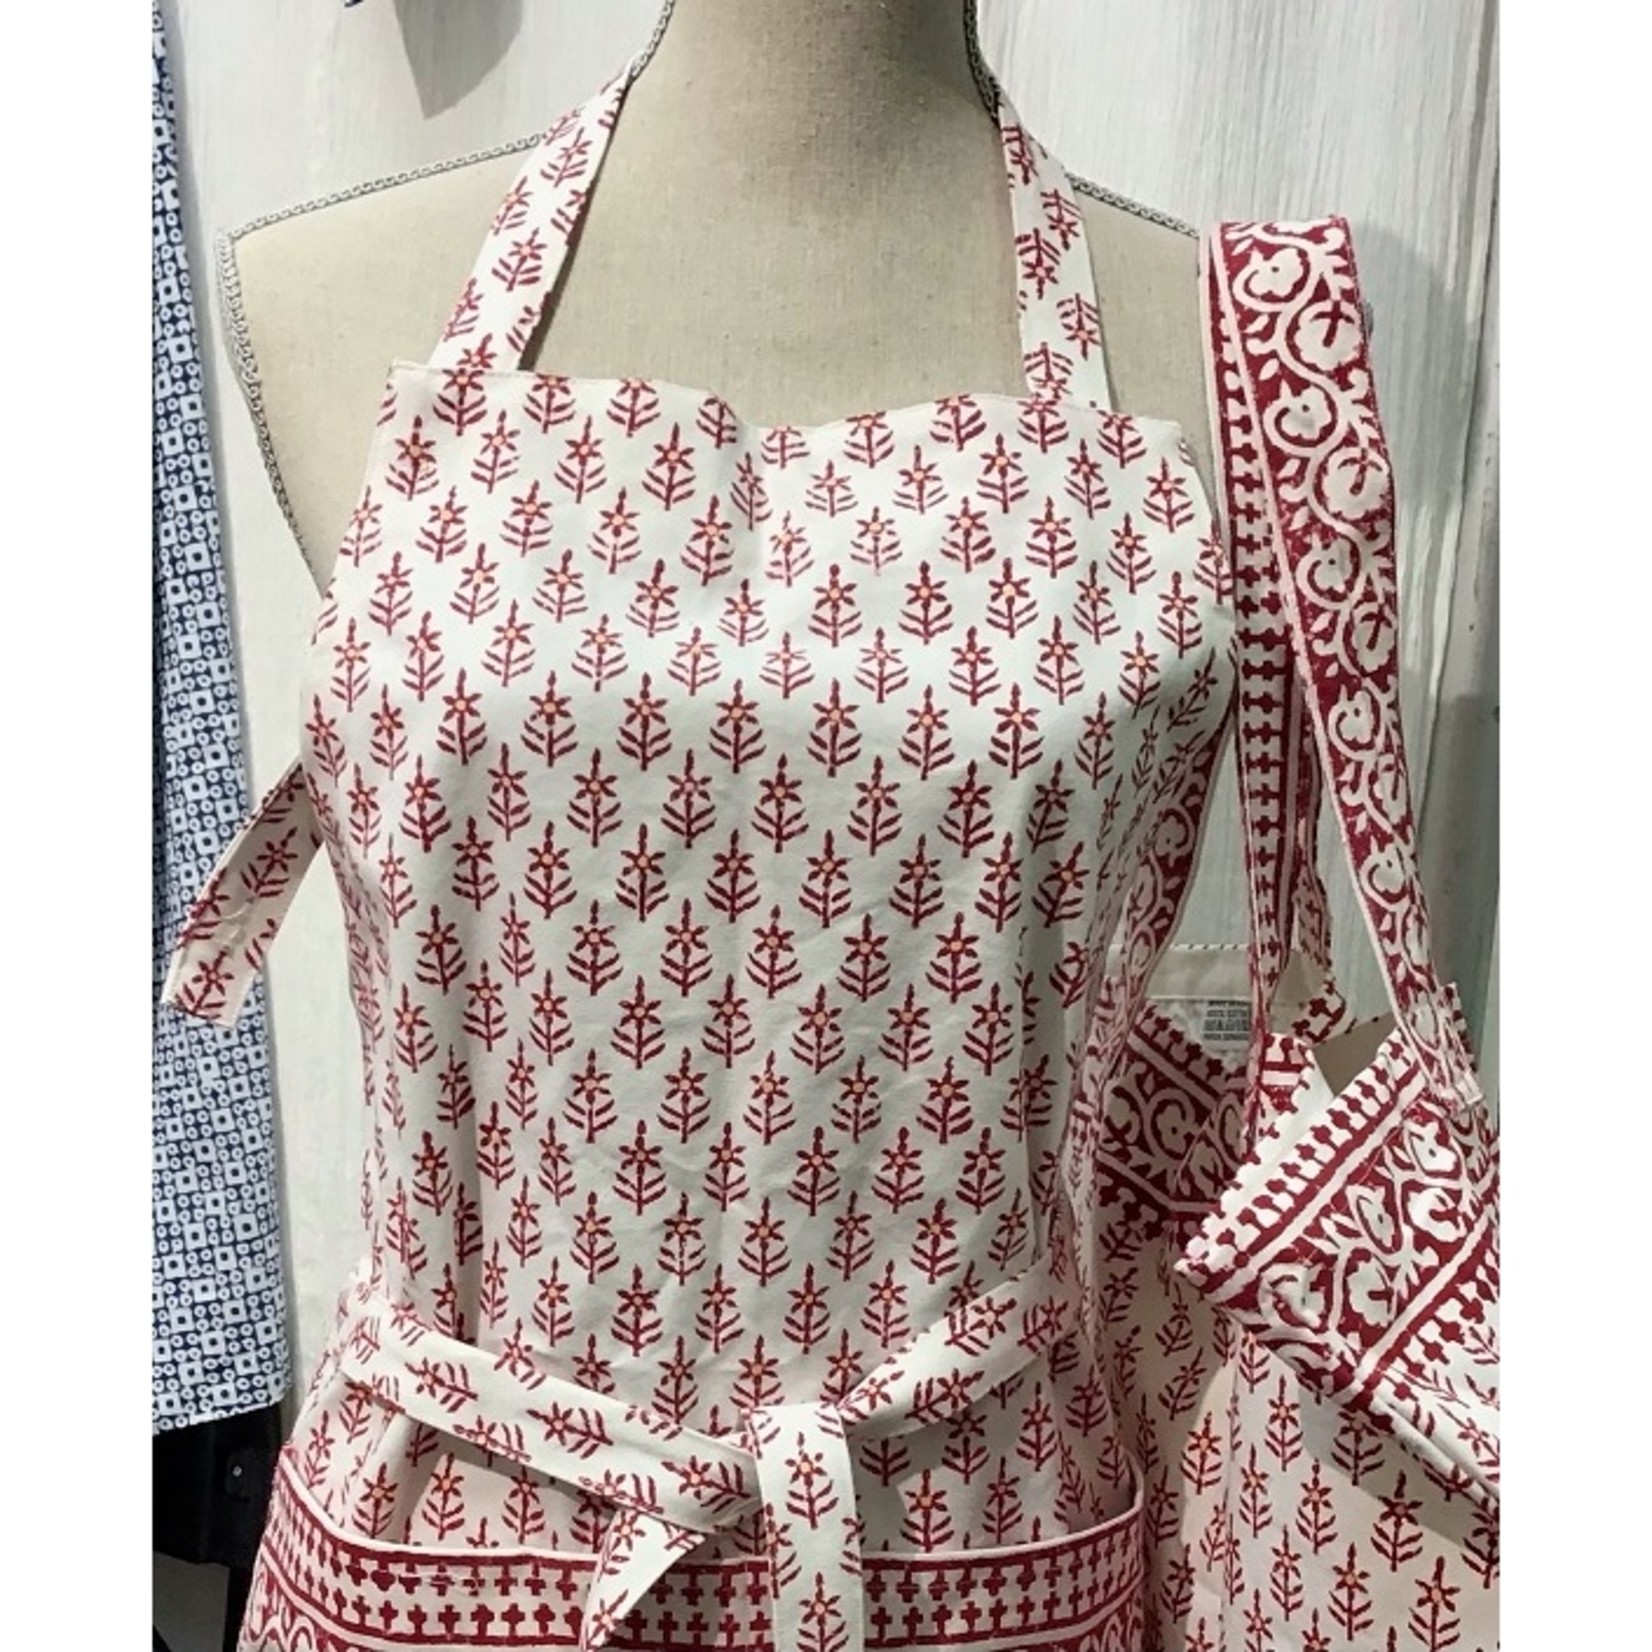 Hand-Blocked Aprons - Molly Singer Home